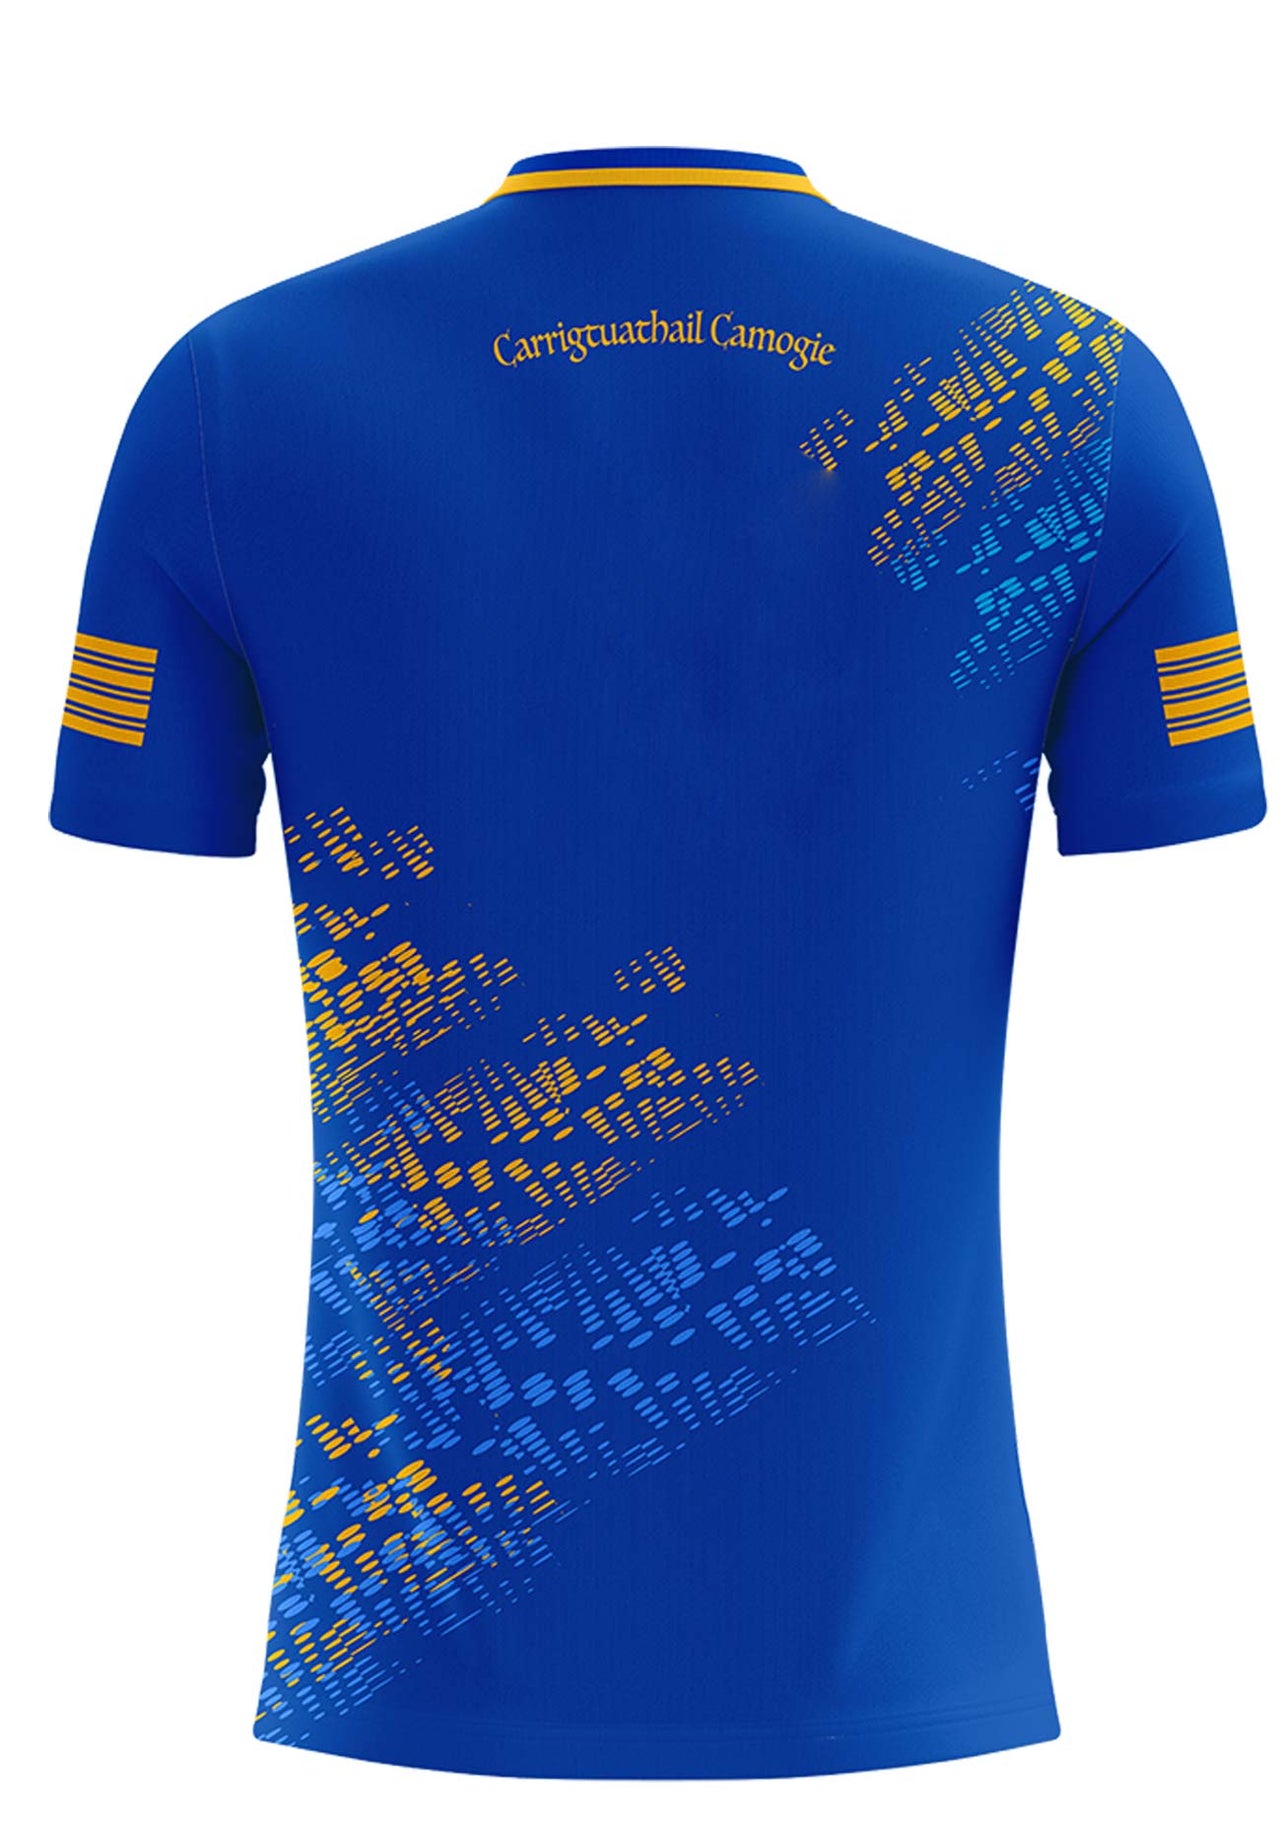 Carrigtwohill Camogie Home Jersey Player Fit Adult